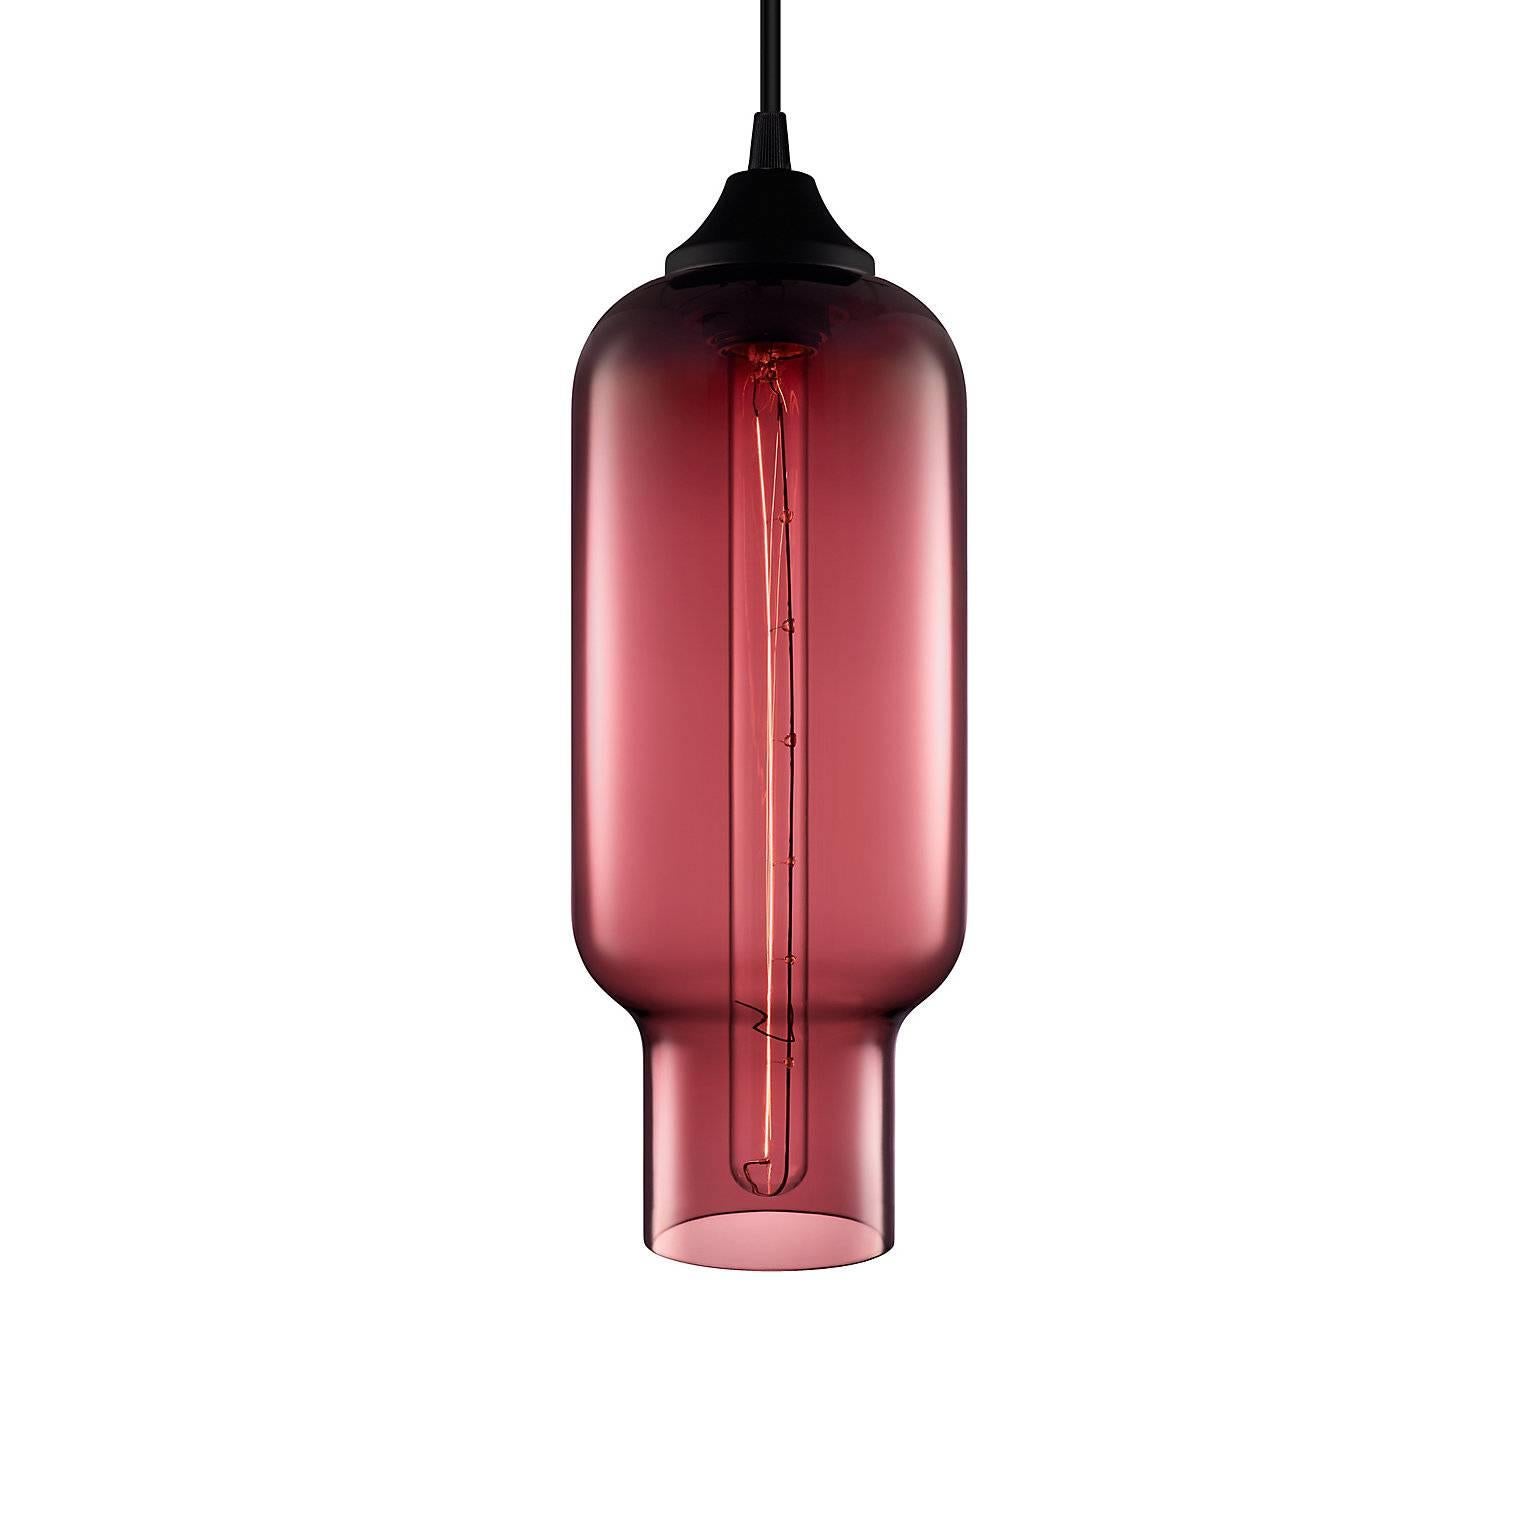 Paying homage to ancient towers of light, the Pharos pendant is sleek enough to stand on its own and simple enough to shine in tightly grouped bouquets. Every single glass pendant light that comes from Niche is handblown by real human beings in a